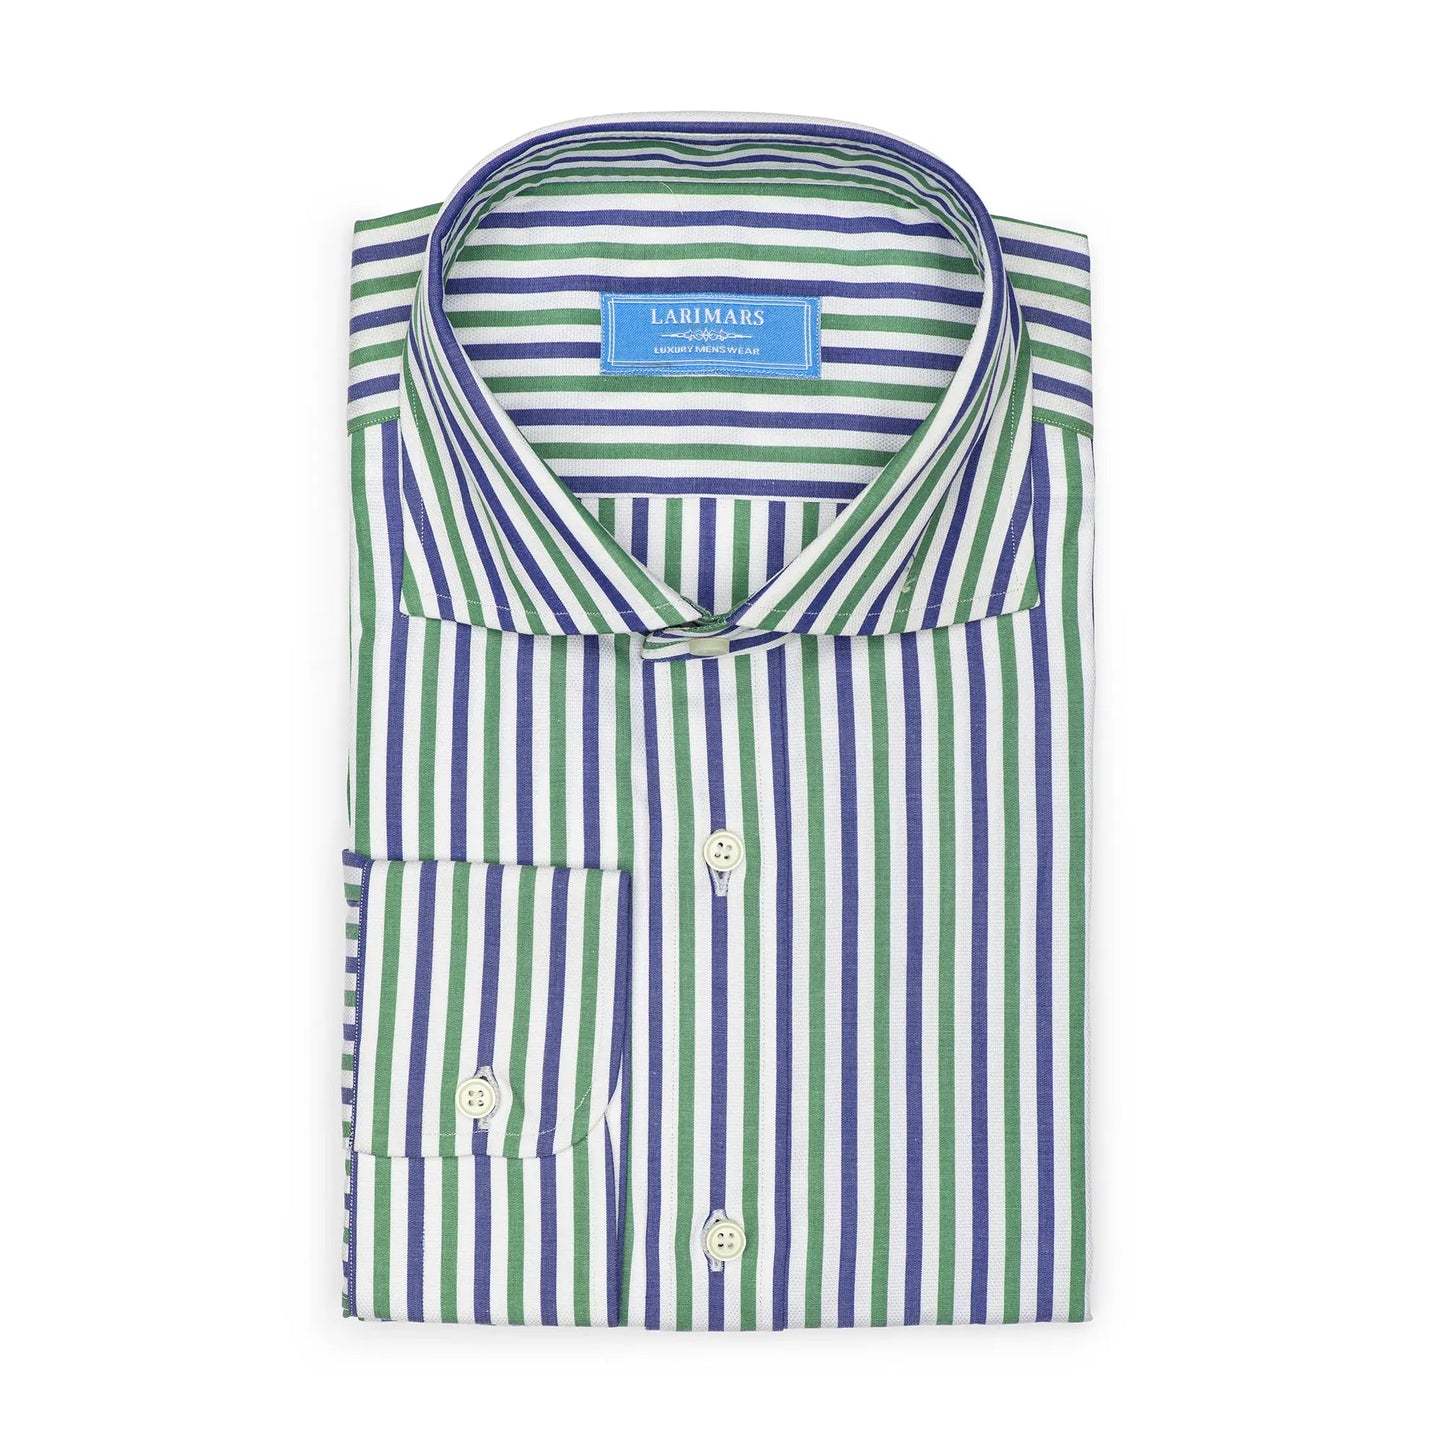 Blue & Green Dobby Stripe - Larimars Clothing Men's Formal and casual wear shirts